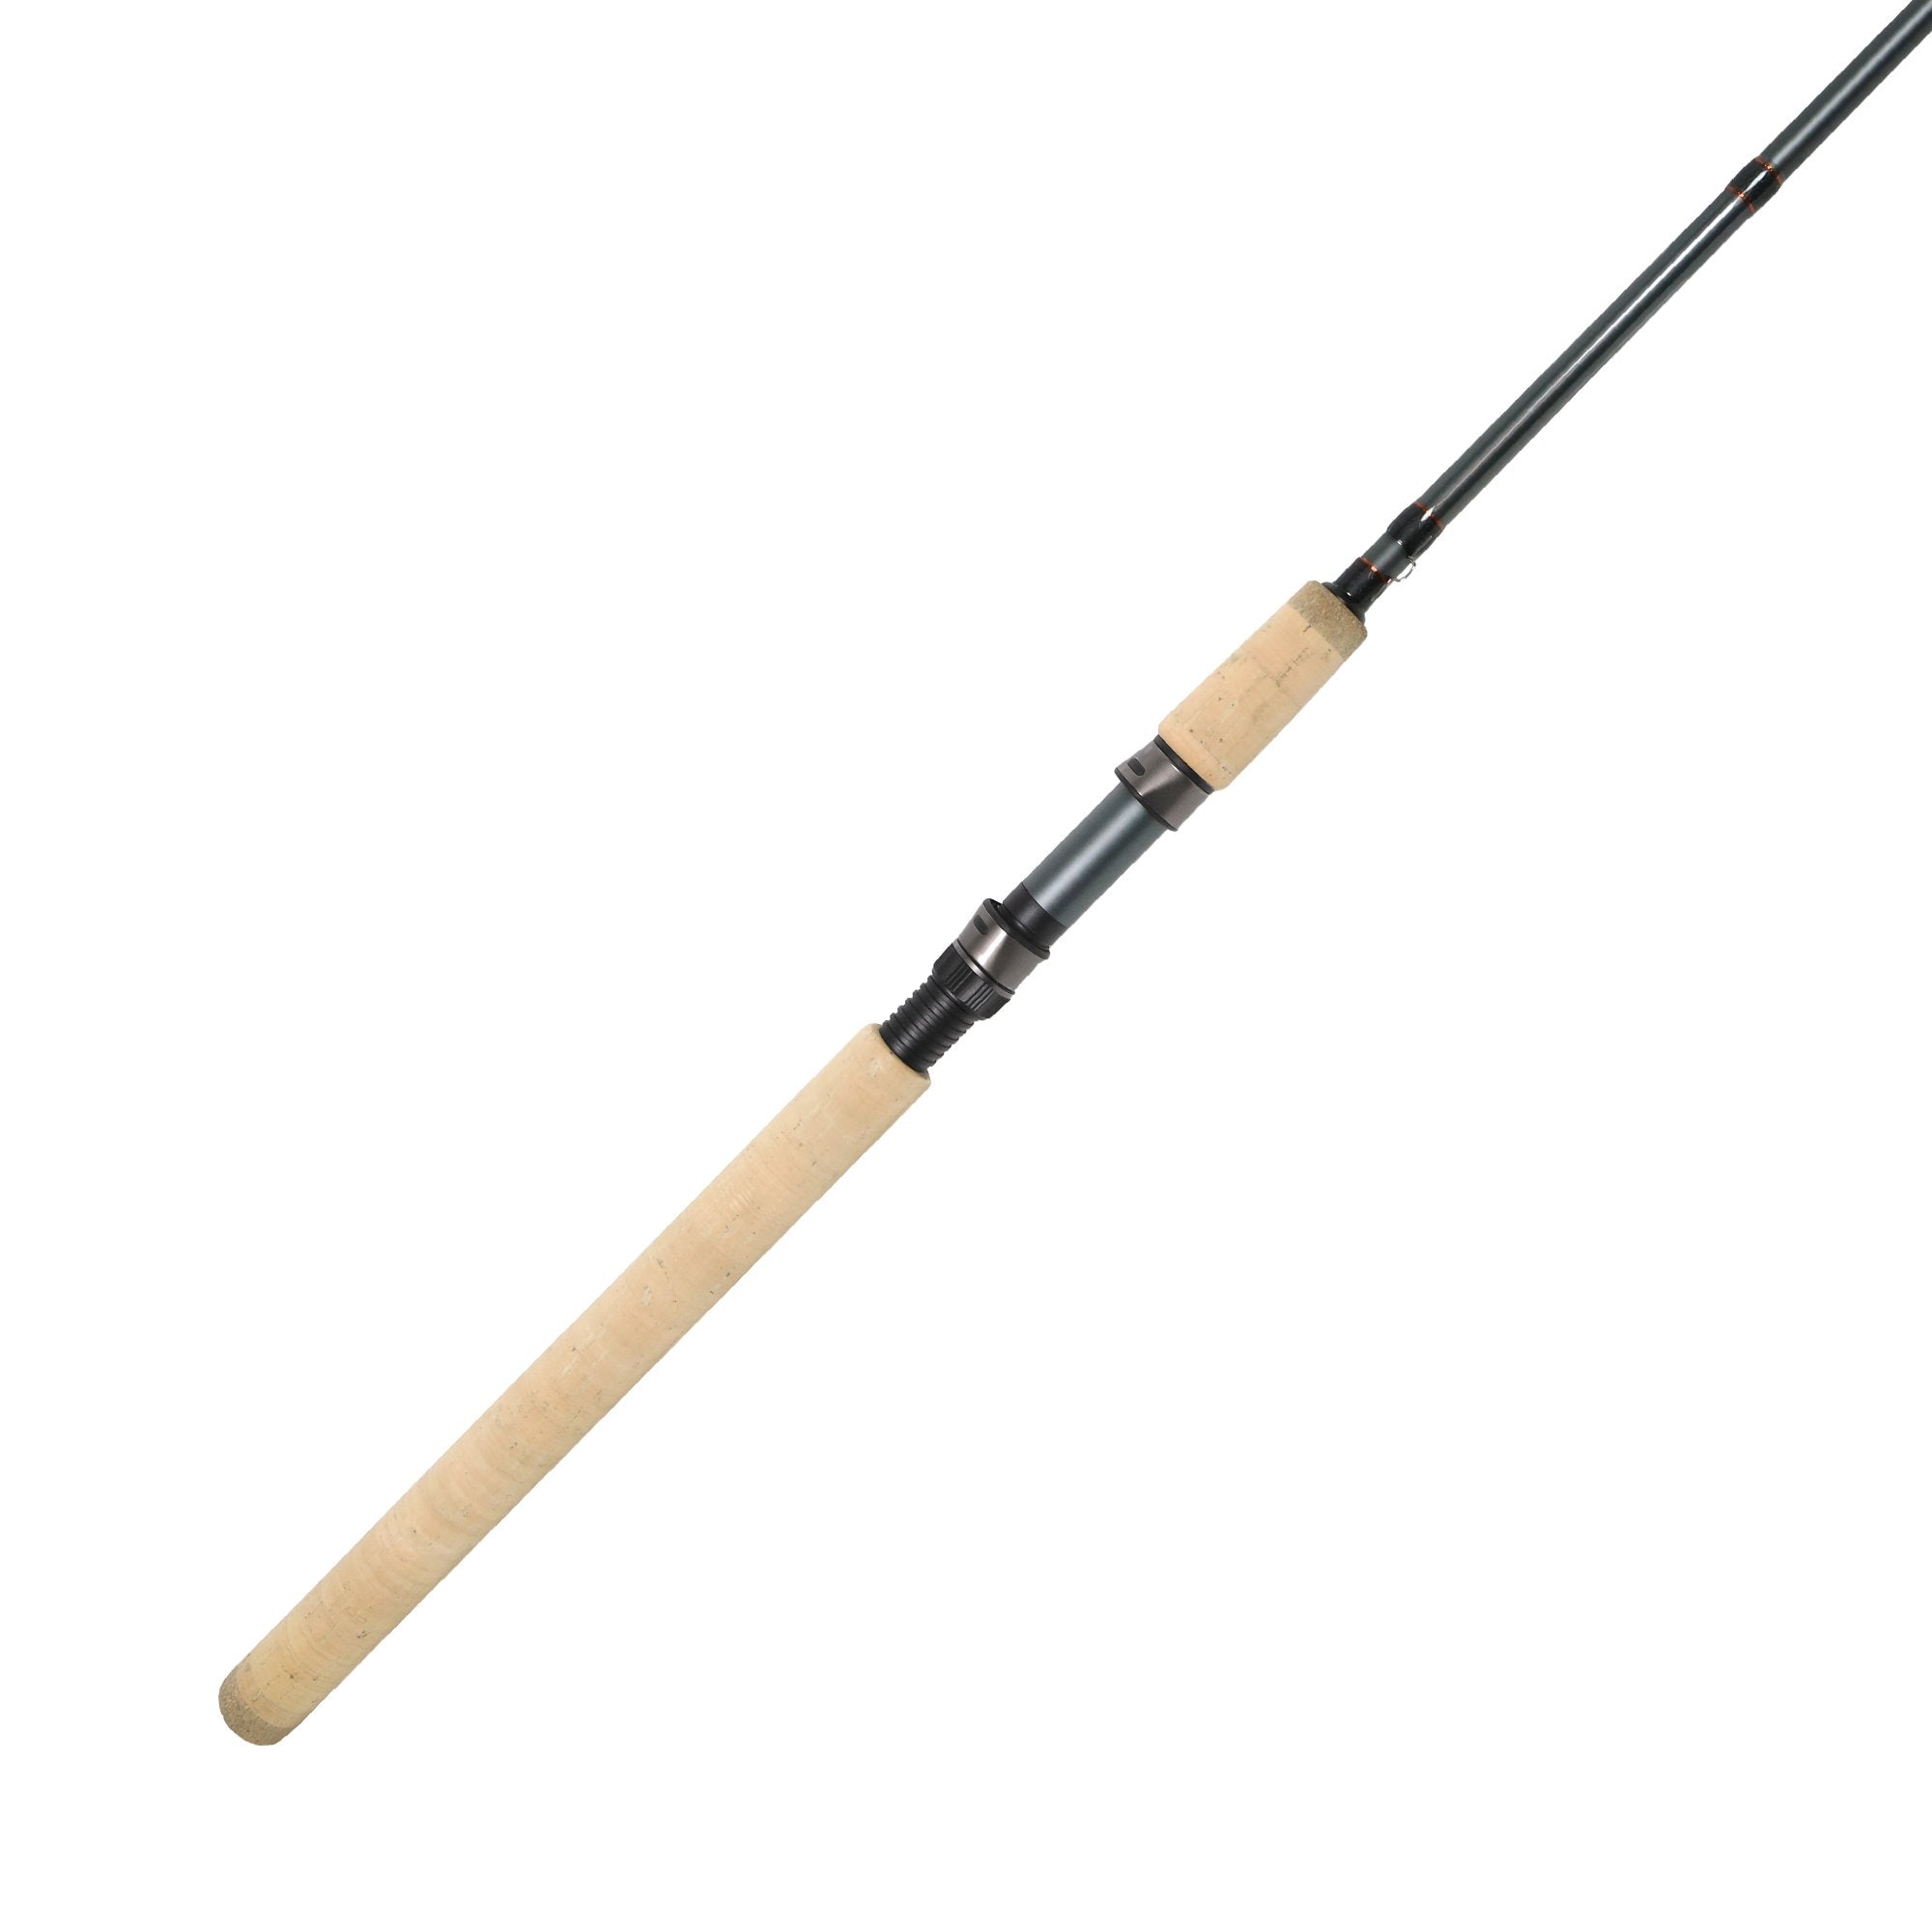 Okuma SST A Series Medium-Light, Spinning Rod with Carbon Grip, 6 - 12 lbs,  3/16 - 1/2oz, 2 Piece SST-S-1062ML-CGa , $5.00 Off with Free S&H — CampSaver